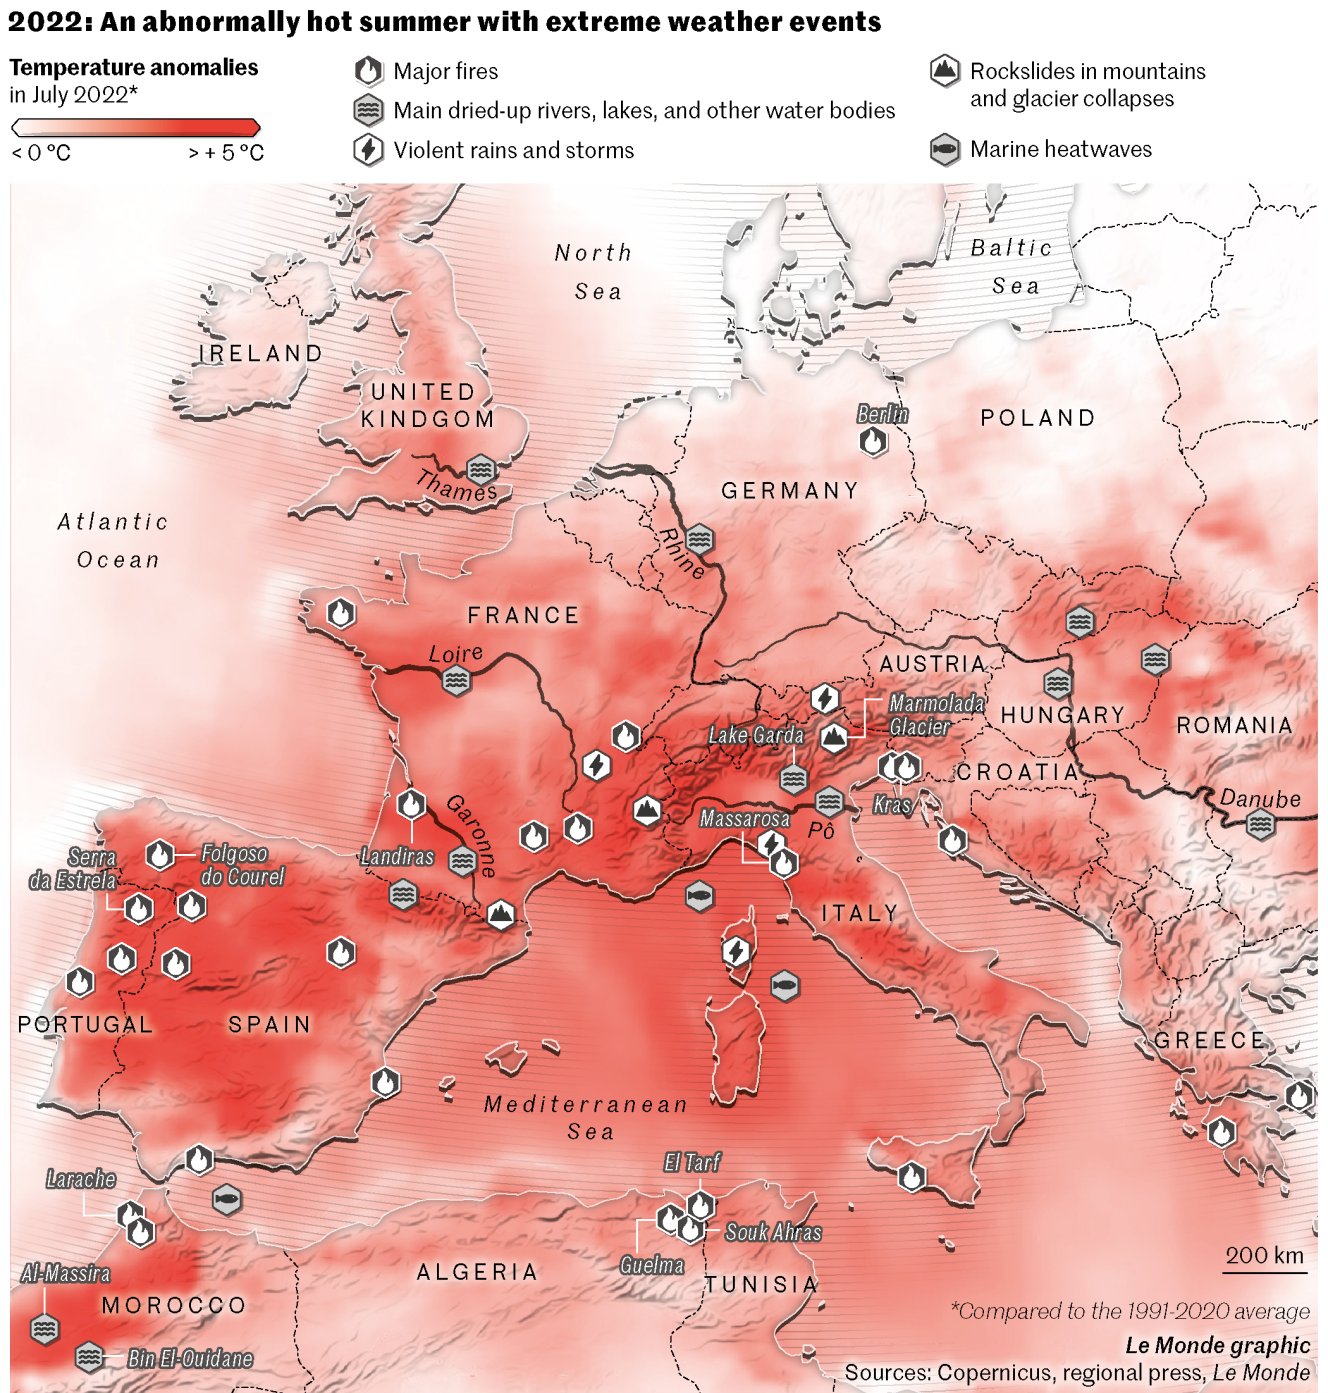 Map of Europe and the Mediterranean's summer 2022 temperatures and